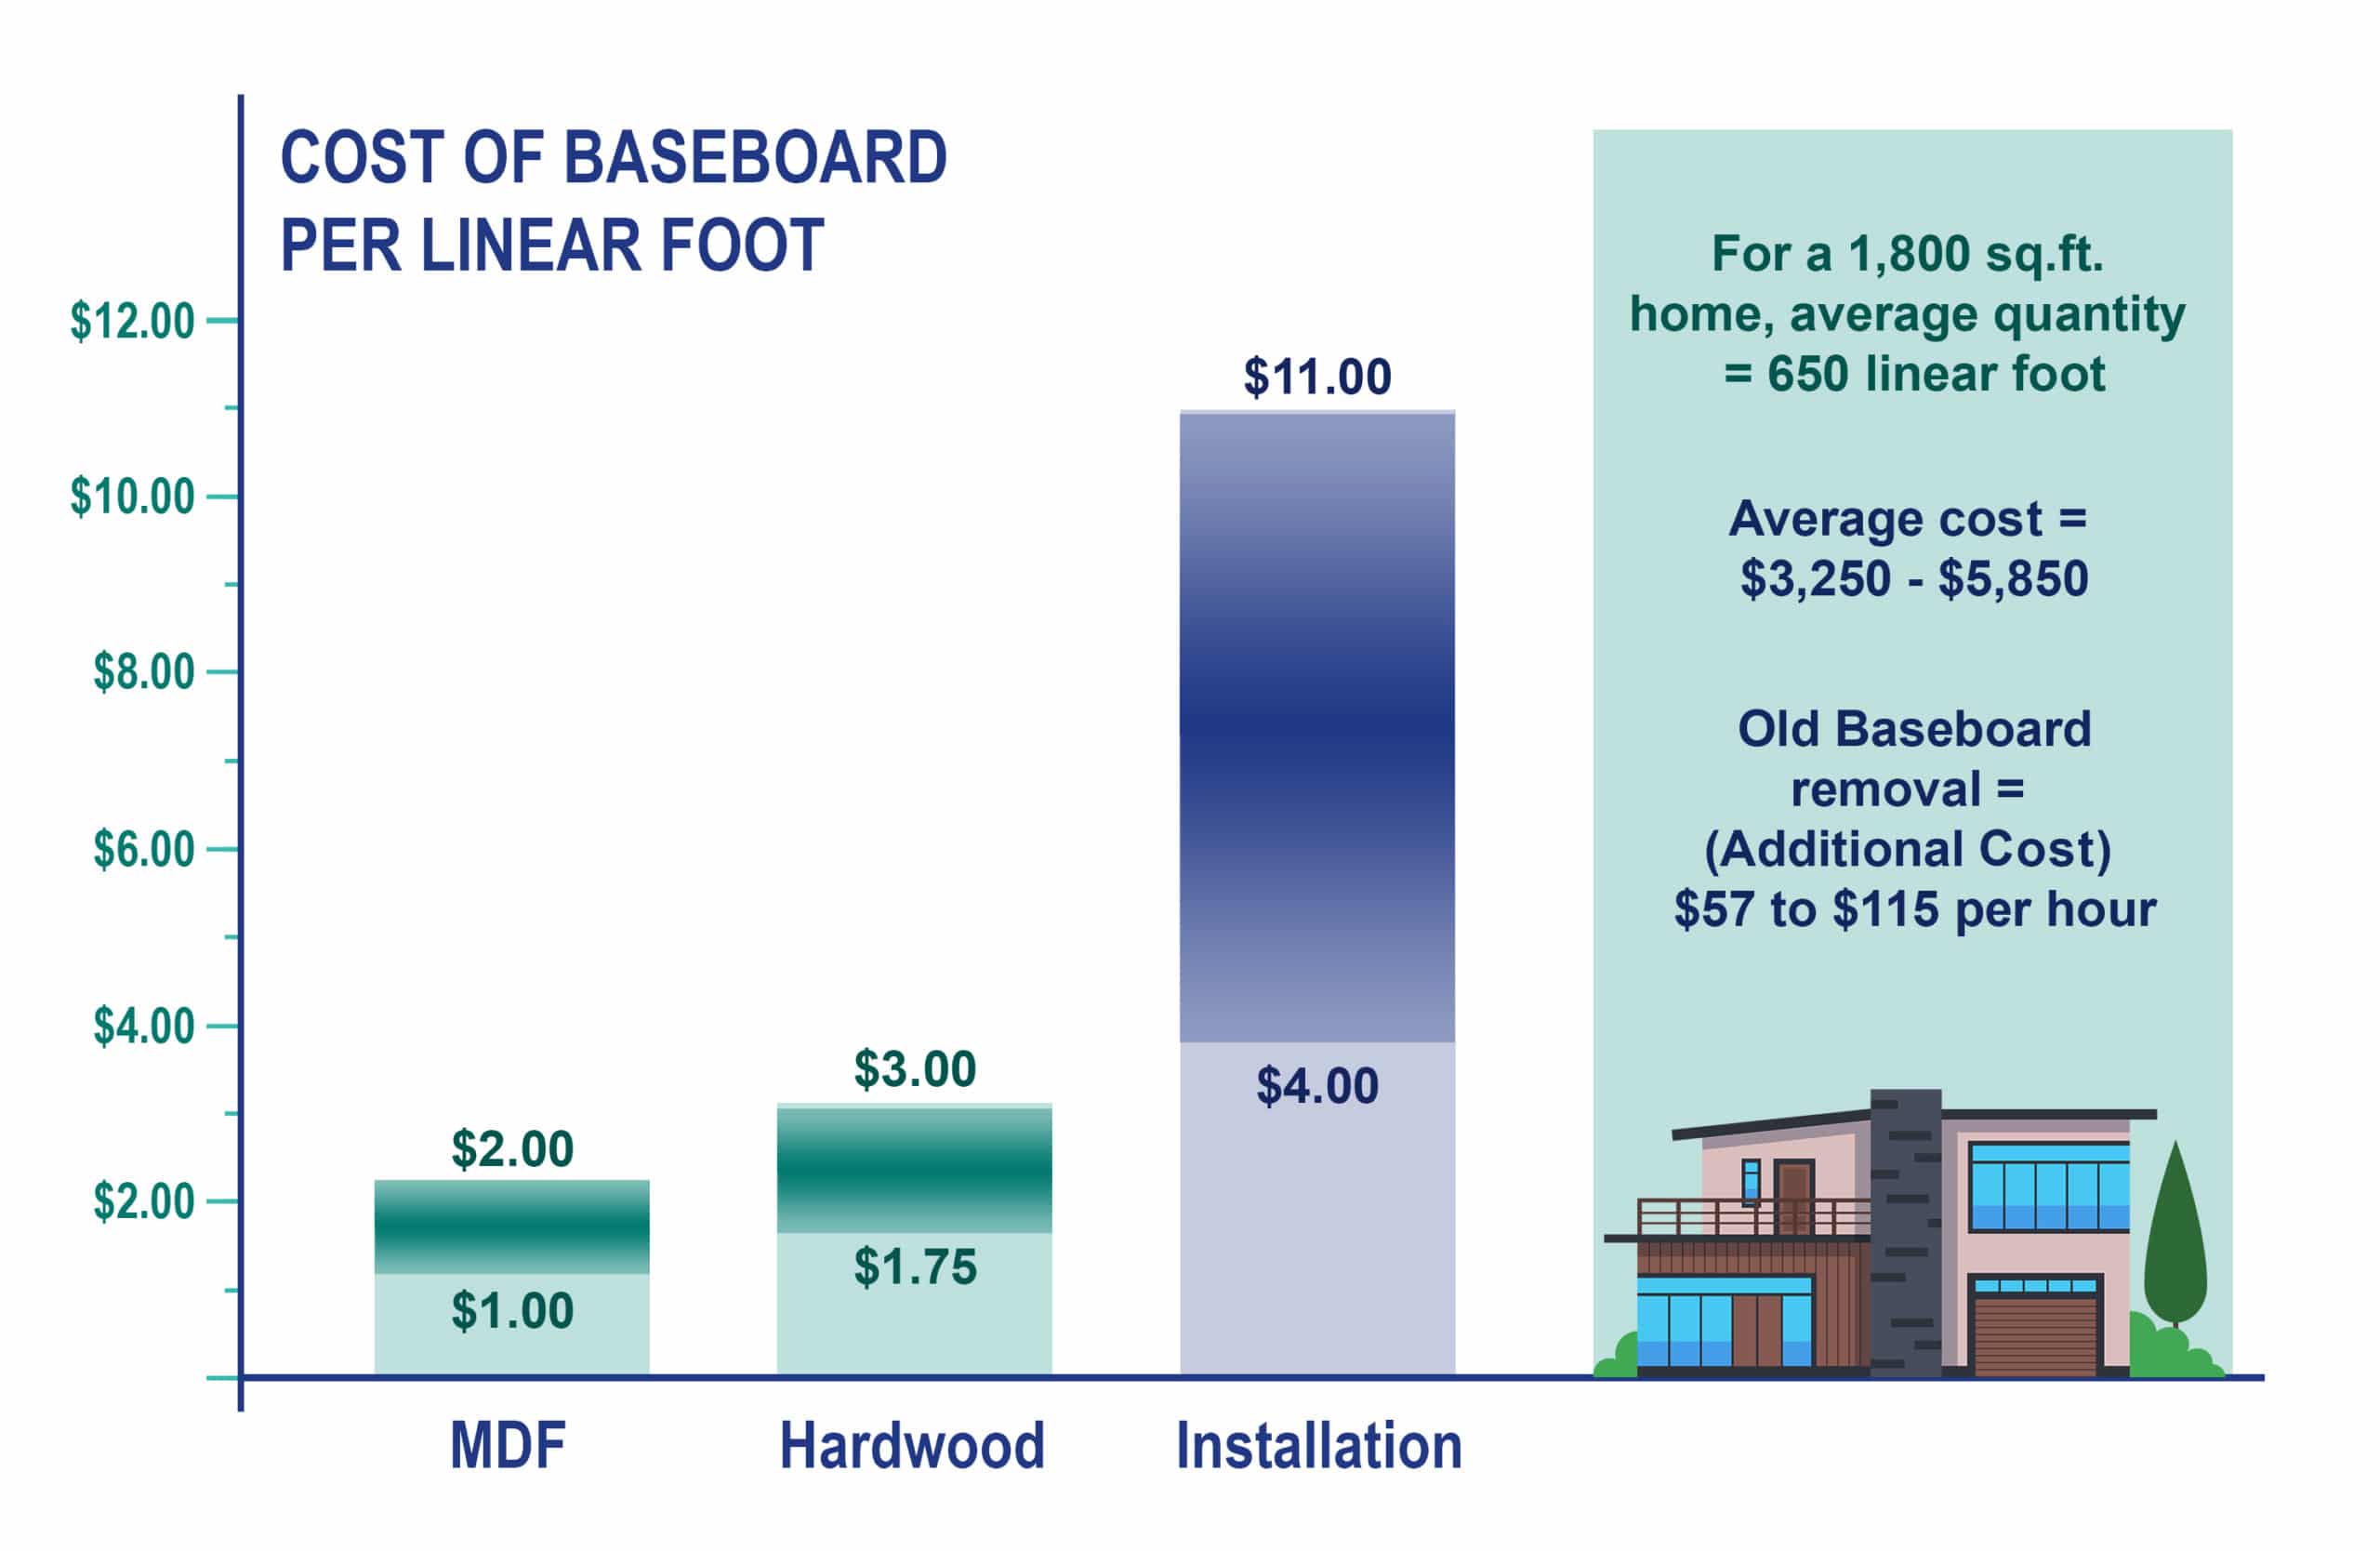 Chart showing the cost of baseboard per linear foot